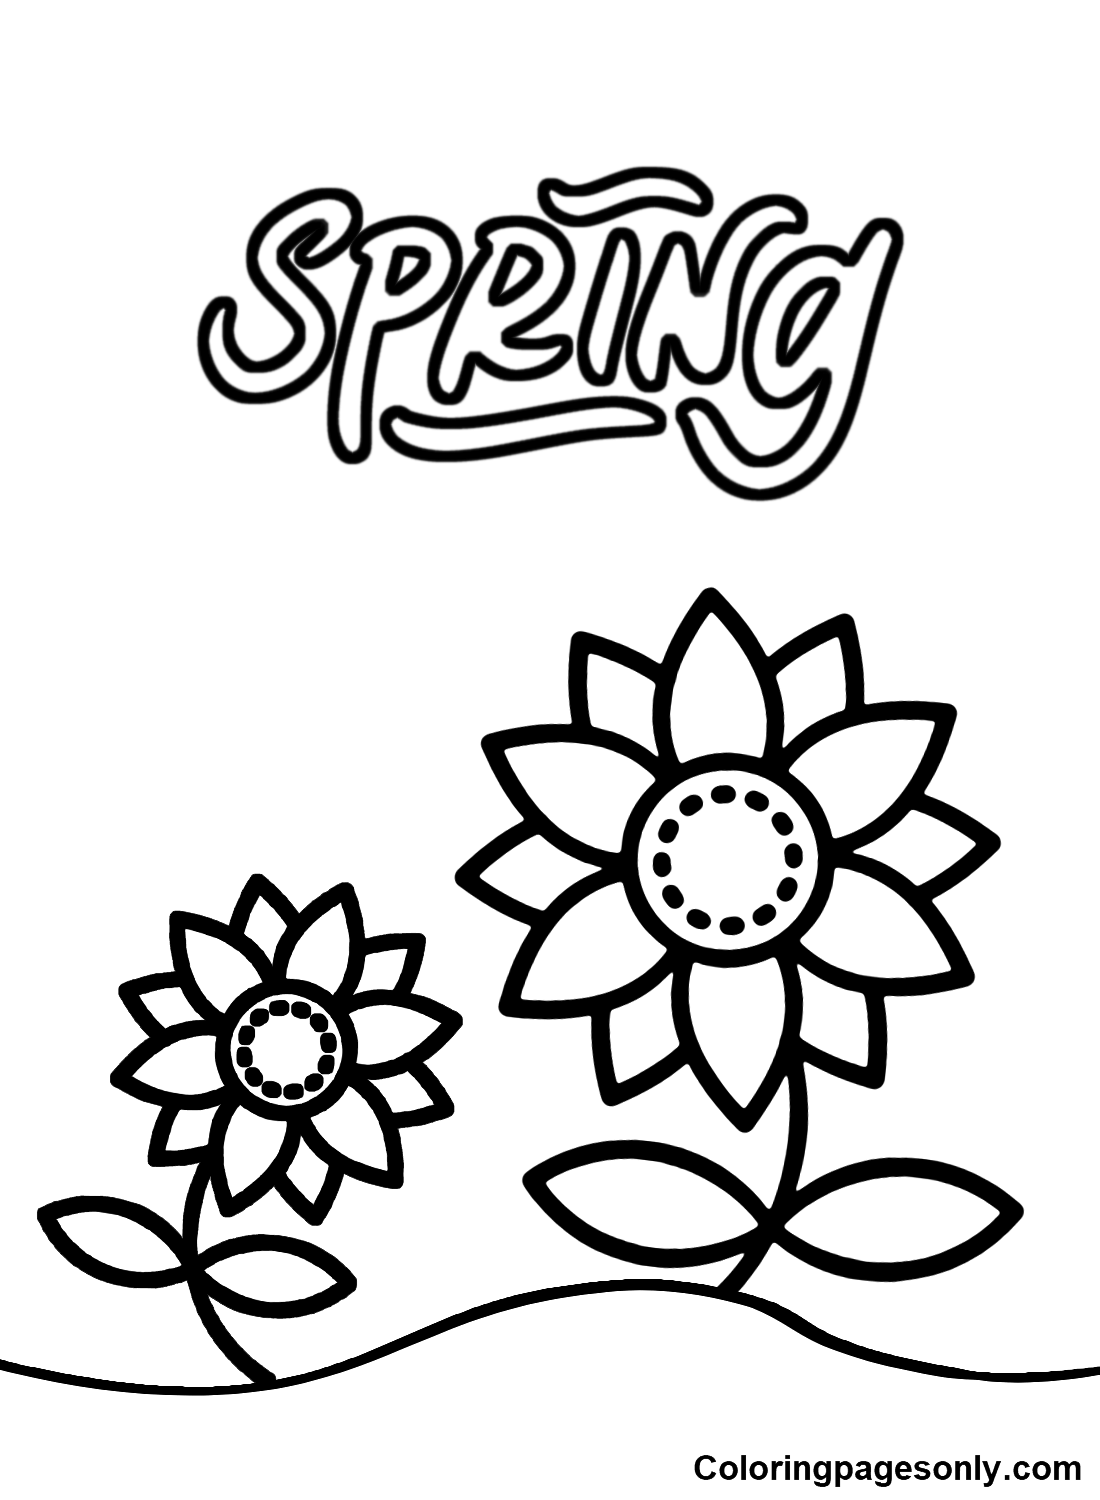 Happy First Day of Spring Image Coloring Page